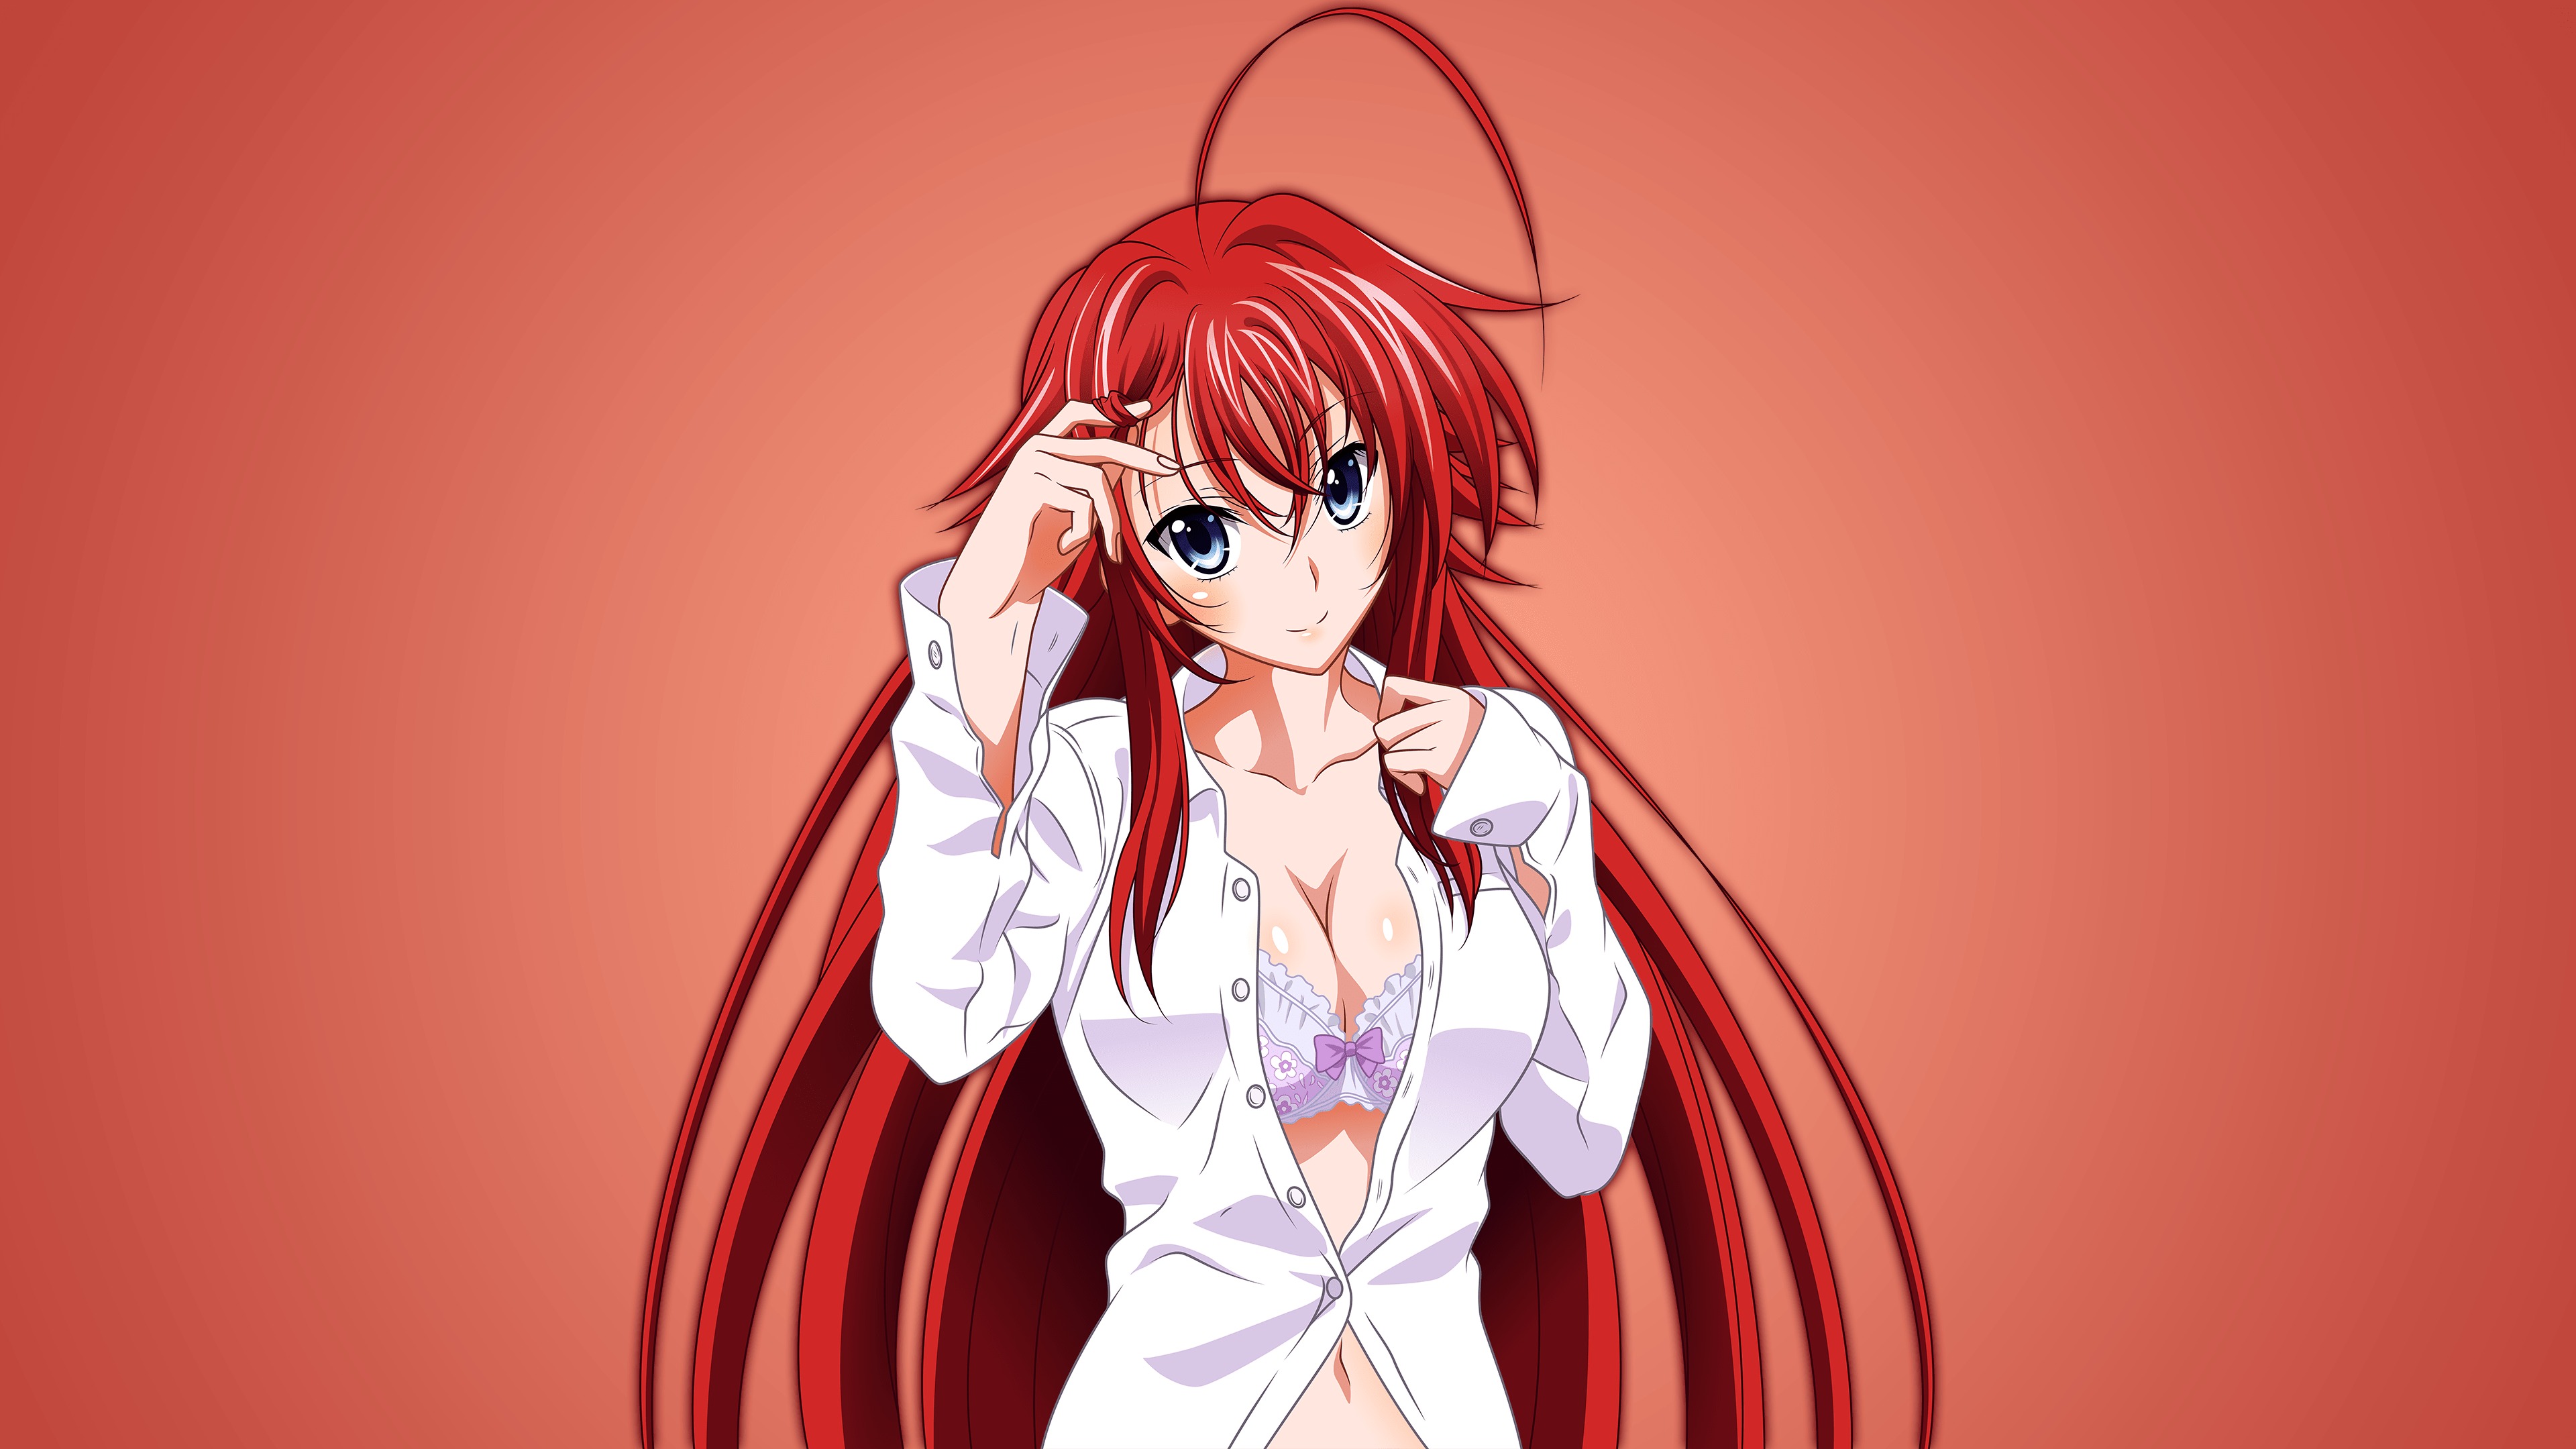 Rias Gremory like docter